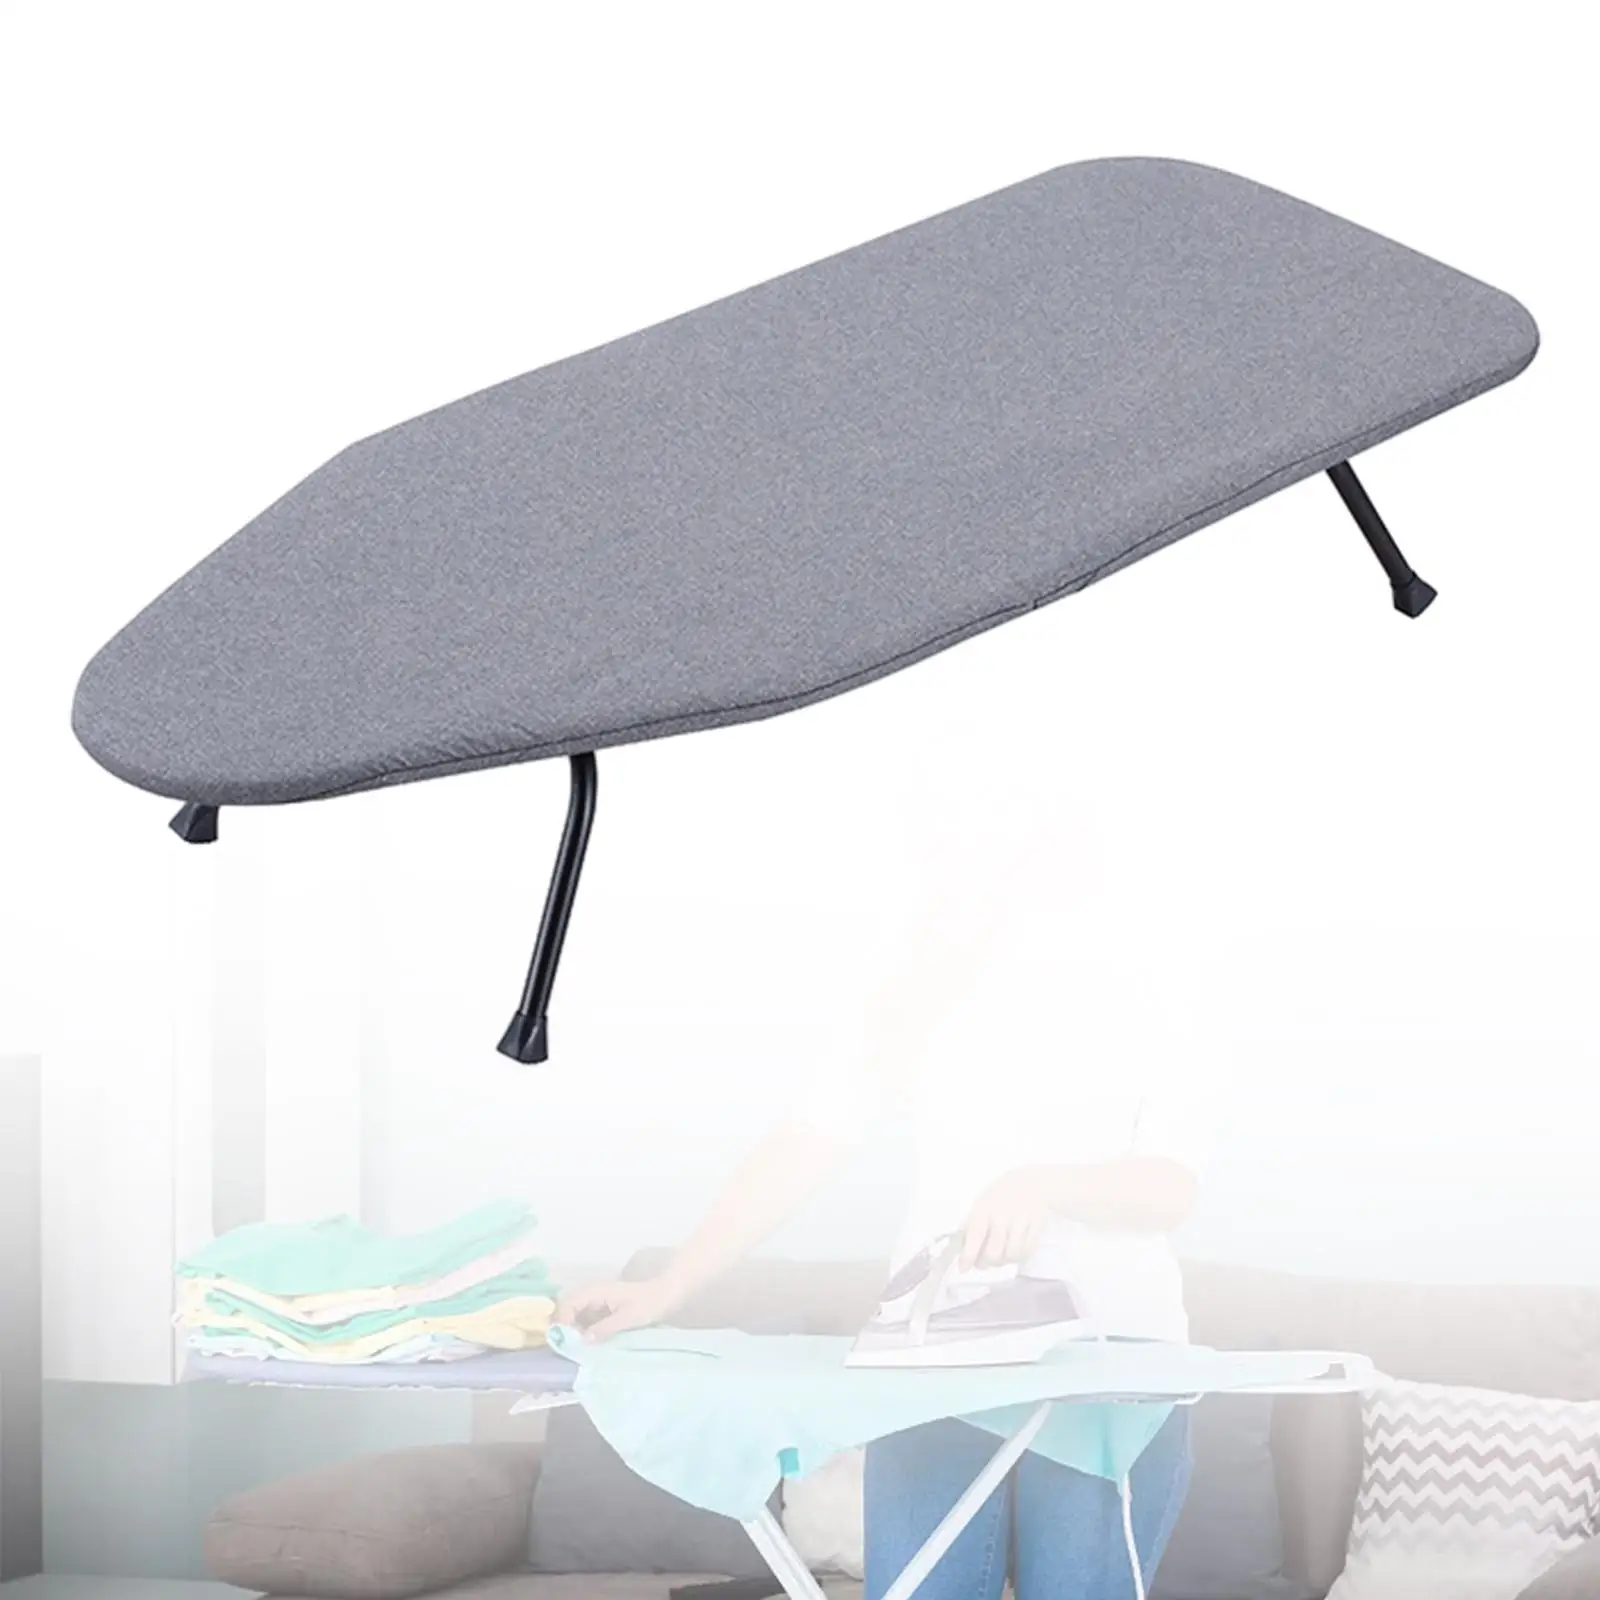 Tabletop Ironing Board Heavy Duty Ironing Table with Folding Legs Foldable